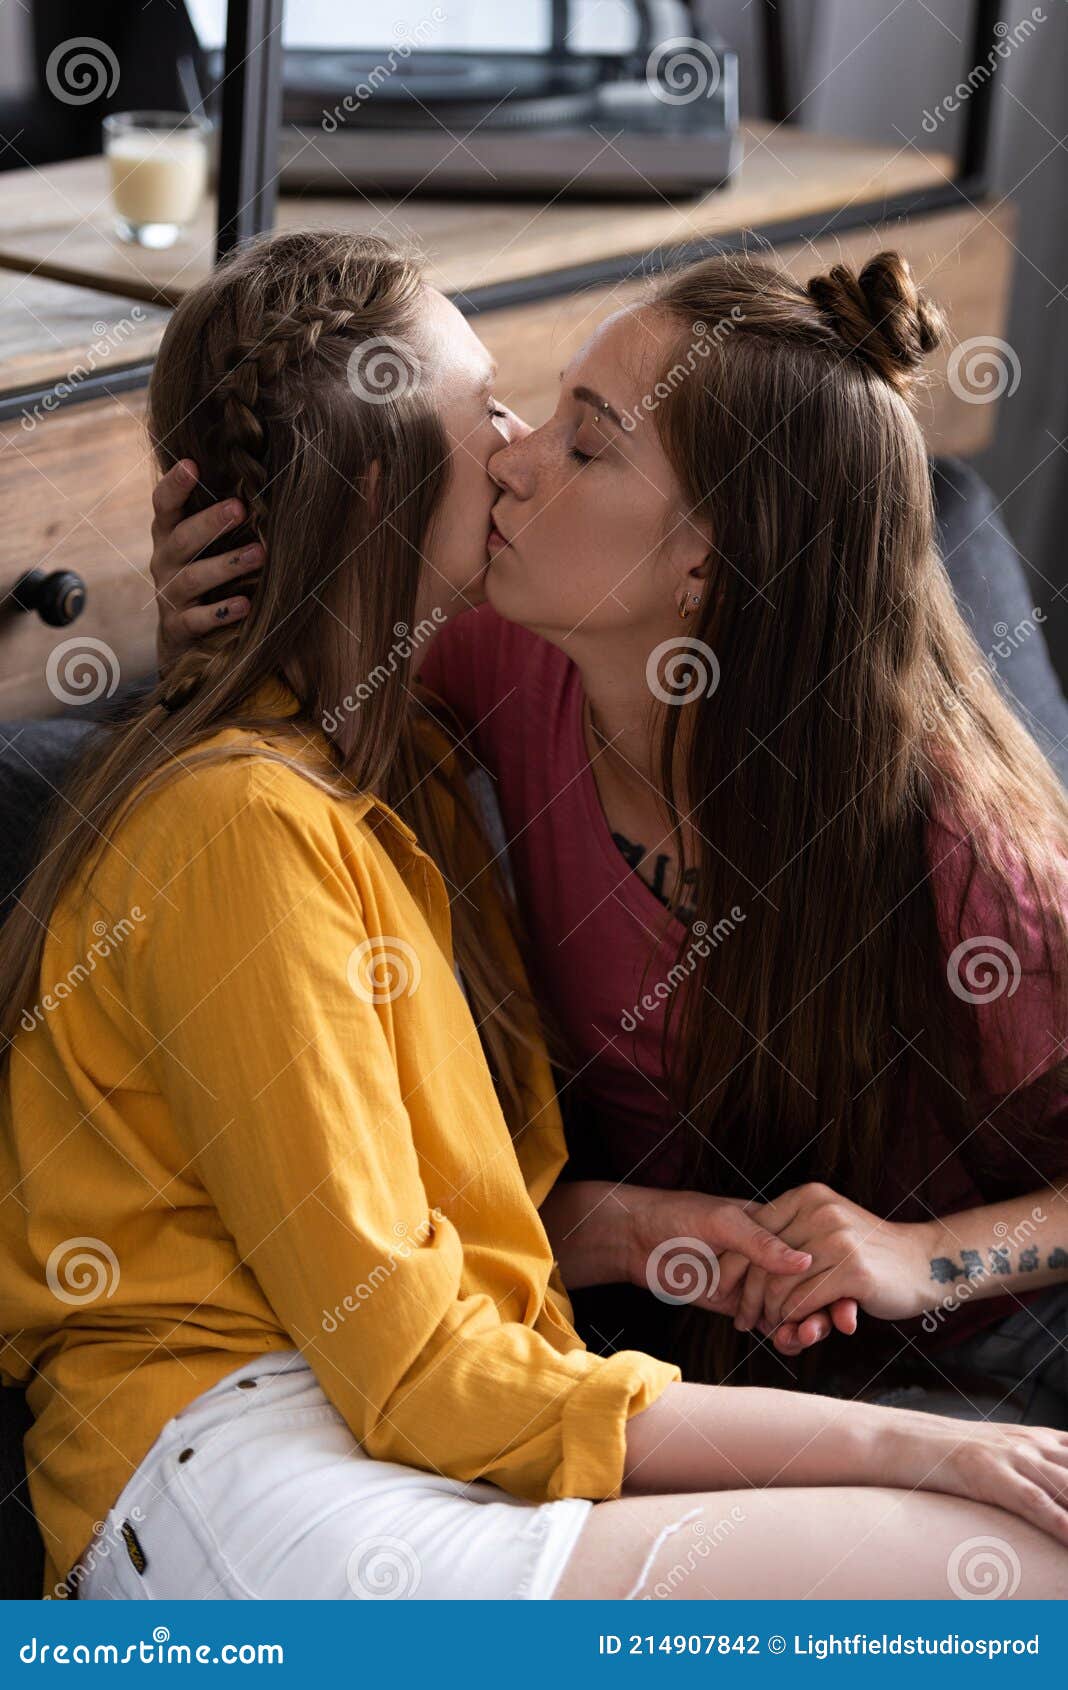 debbie waldock recommends real lesbians making out pic